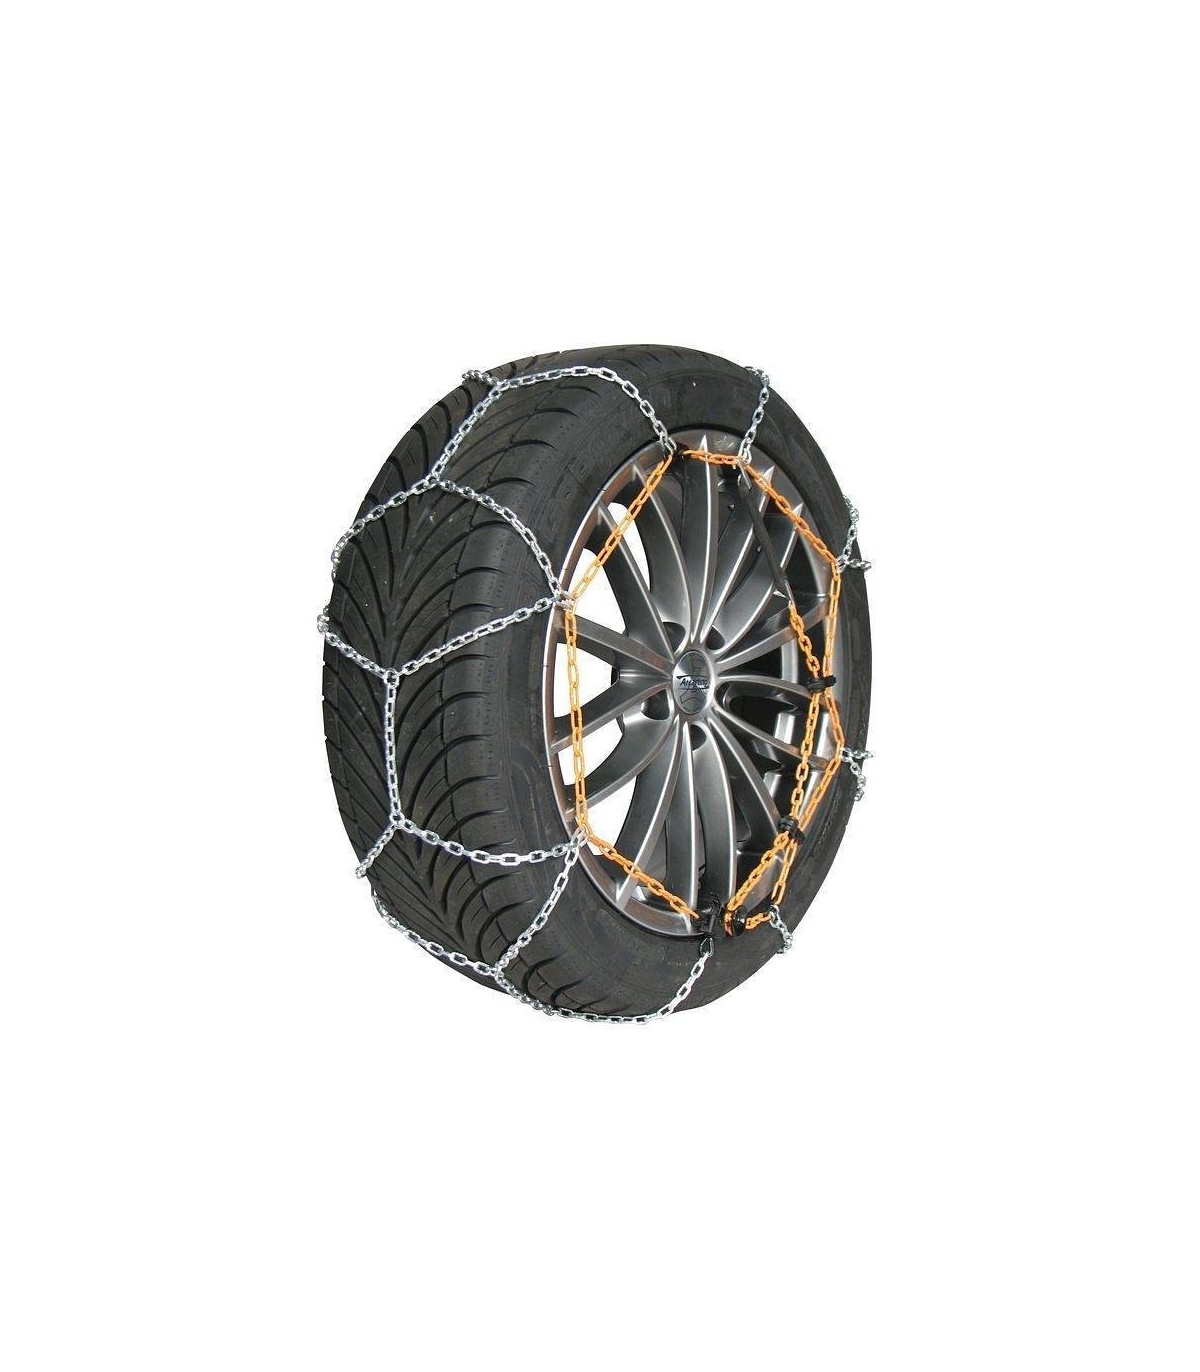 Chaines neige manuelle 9mm 215/55 R17 - 215 55 17 - 215 55 R17